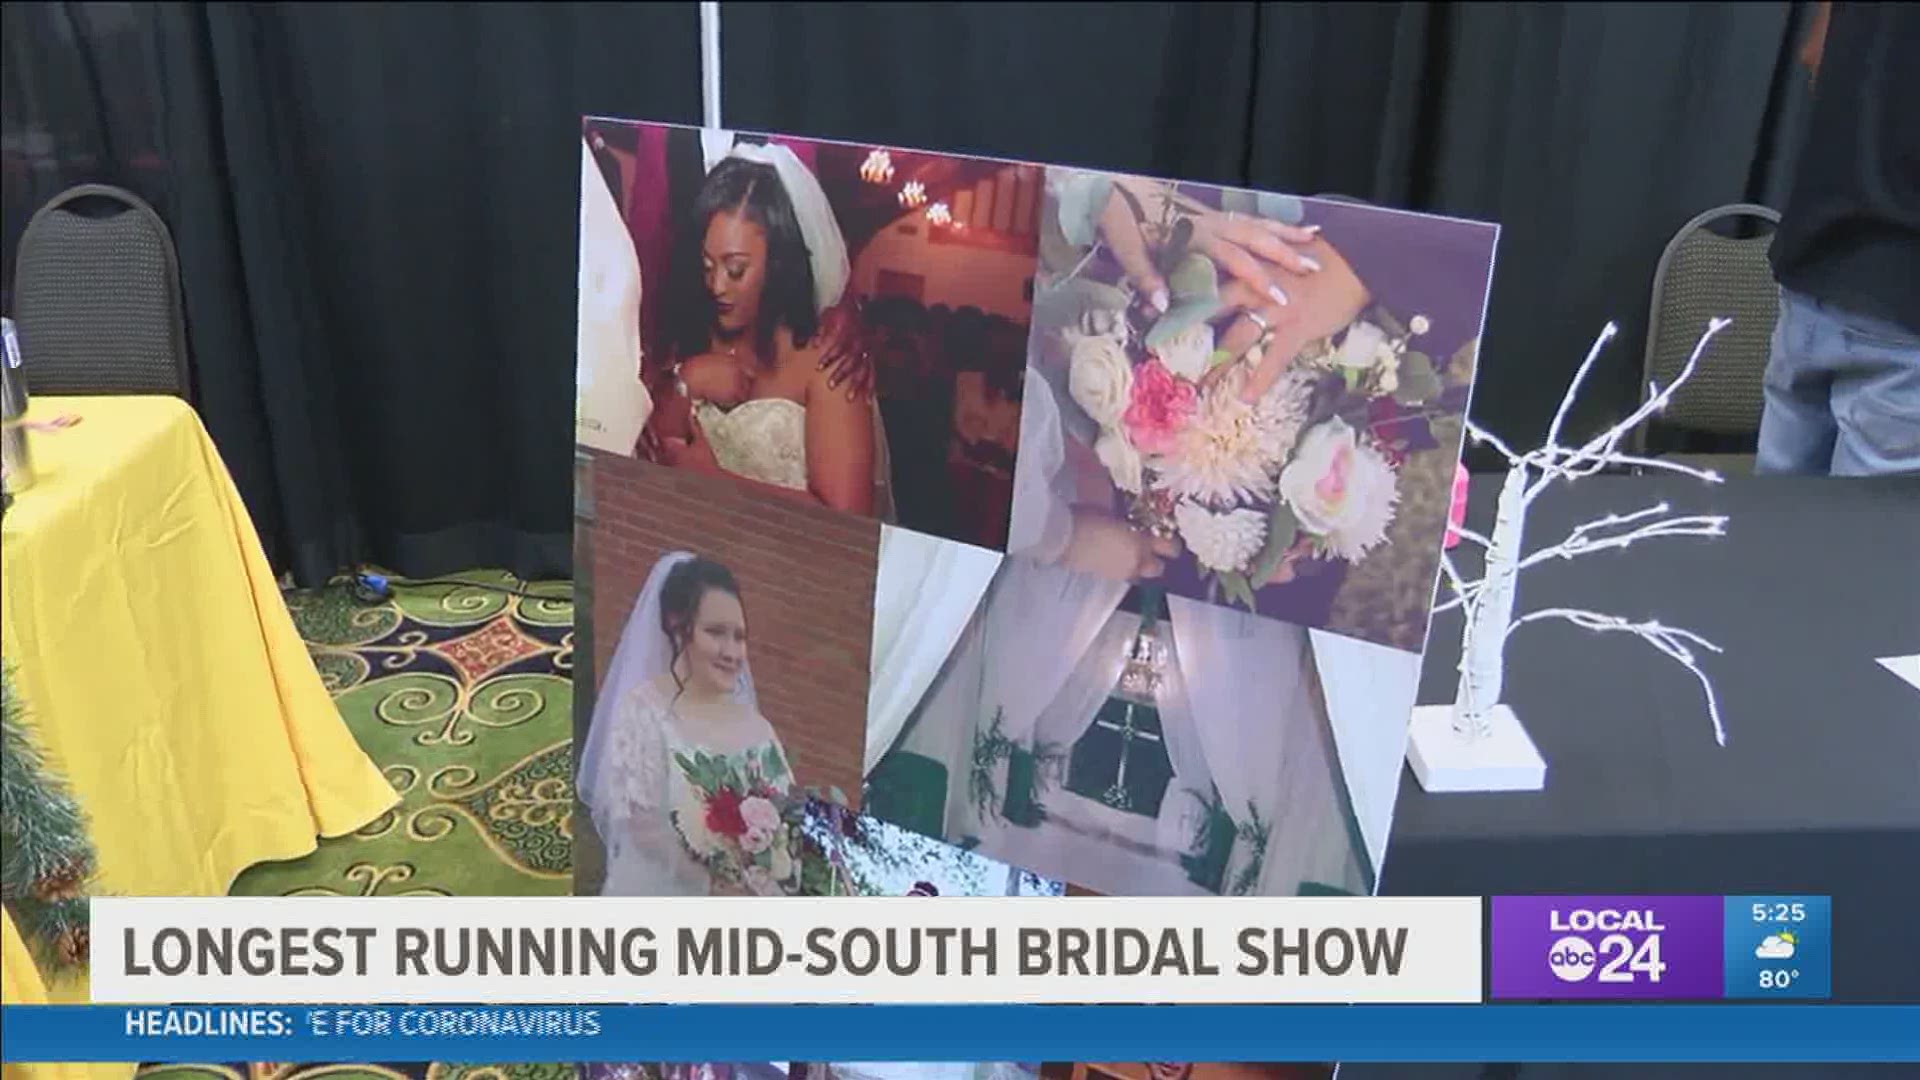 After the past year of brides pushing back their weddings due to COVID, the Memphis Bridal Show was able to welcome brides at the Christmas in July Summer 2021 show